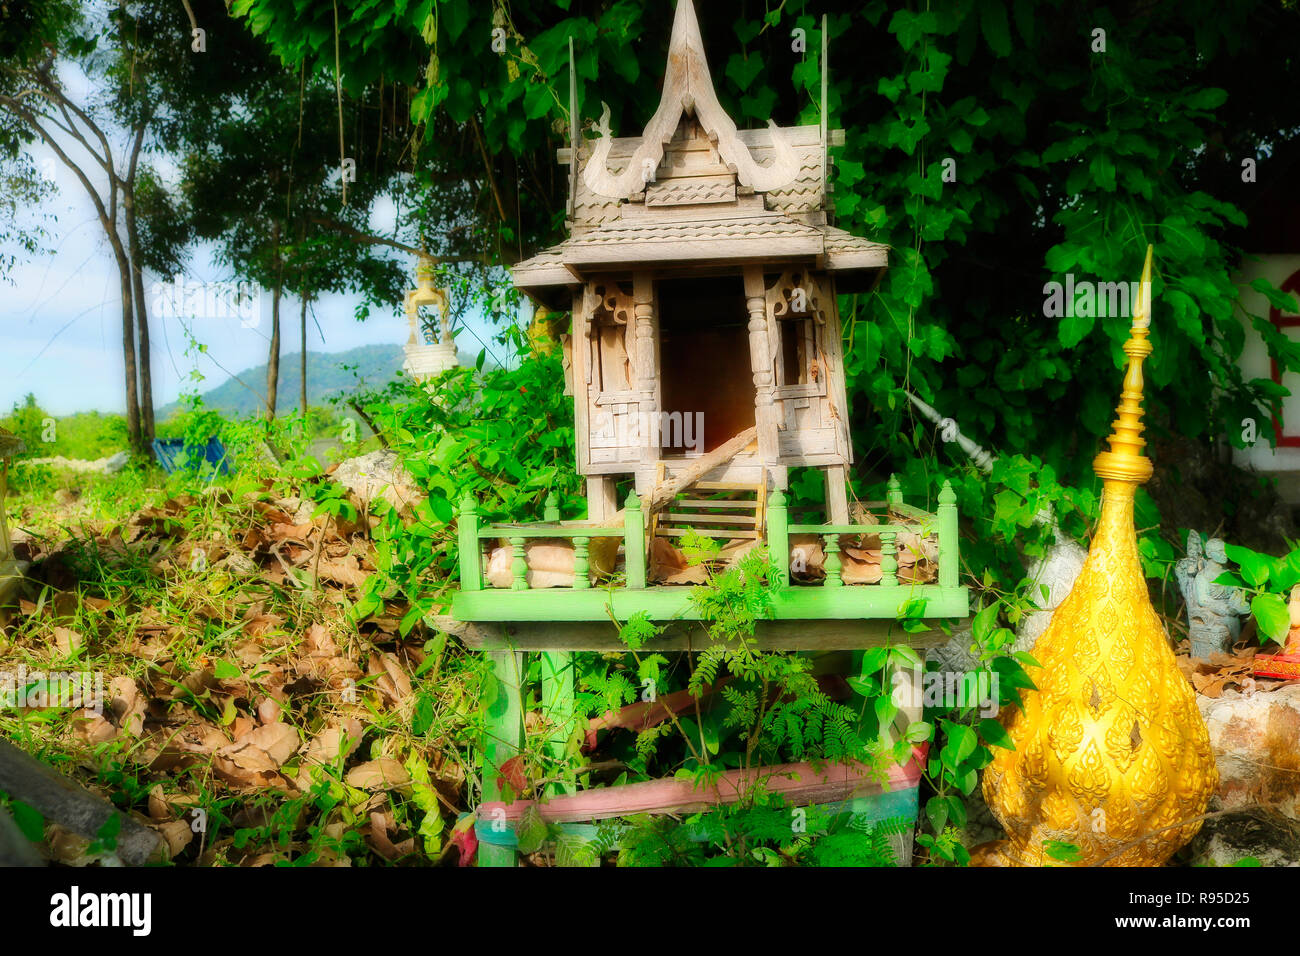 This beautiful photo shows a small dilapidated wooden temple in nature. The photo was taken in Hua Hin in Thailand Stock Photo